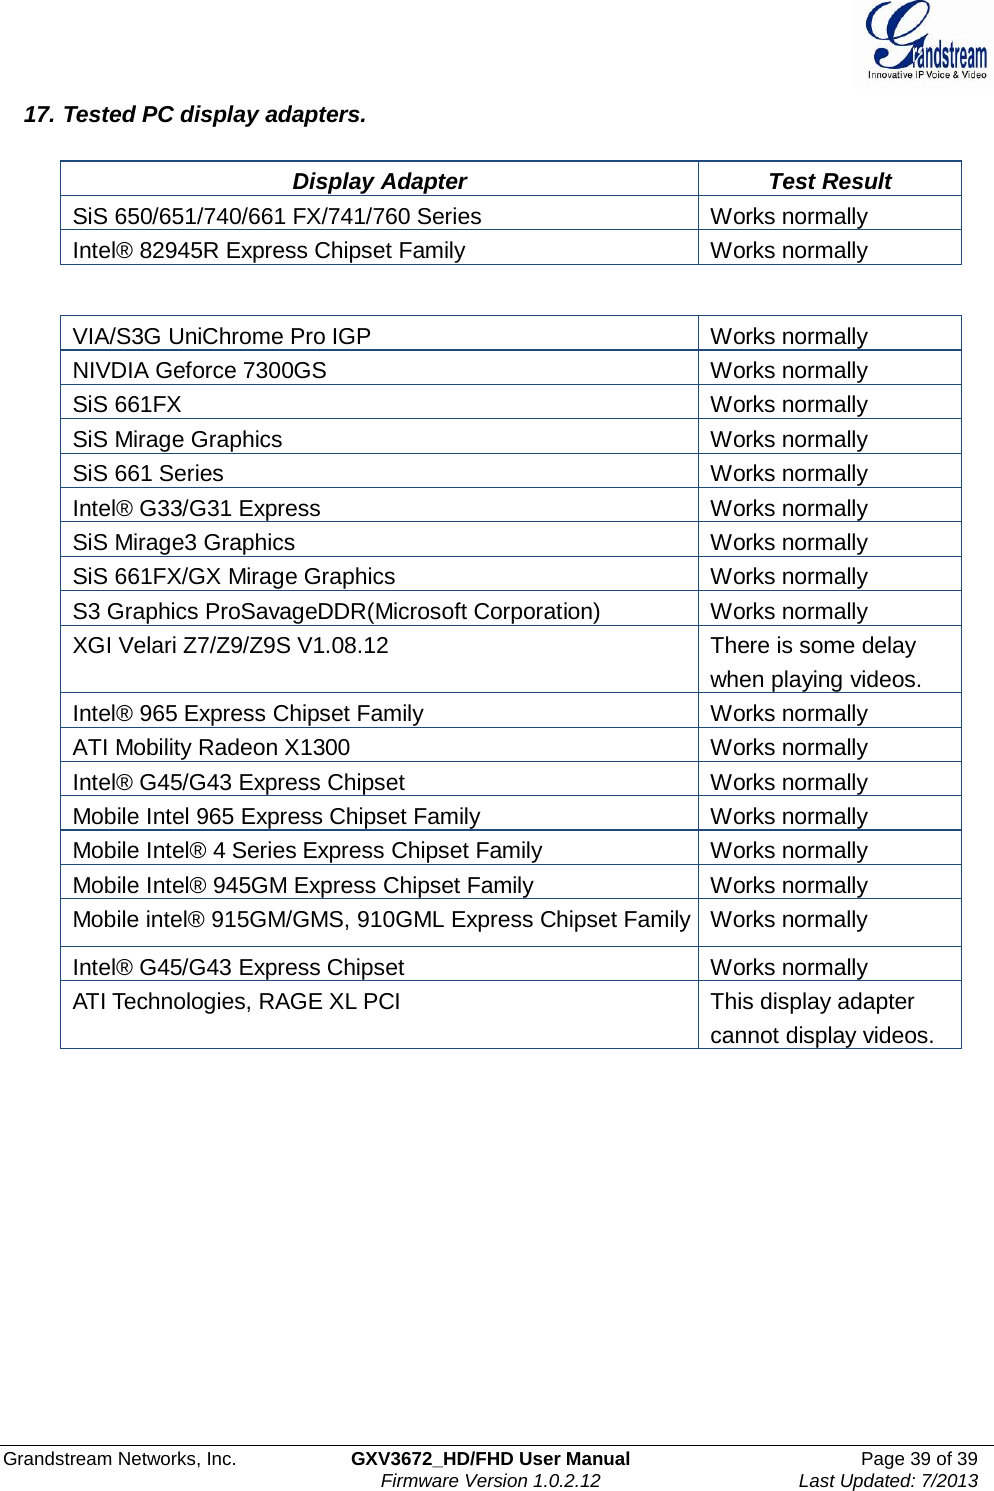  Grandstream Networks, Inc. GXV3672_HD/FHD User Manual Page 39 of 39   Firmware Version 1.0.2.12 Last Updated: 7/2013  17. Tested PC display adapters.   Display Adapter Test Result SiS 650/651/740/661 FX/741/760 Series Works normally Intel® 82945R Express Chipset Family Works normally   VIA/S3G UniChrome Pro IGP Works normally NIVDIA Geforce 7300GS Works normally SiS 661FX Works normally SiS Mirage Graphics Works normally SiS 661 Series Works normally Intel® G33/G31 Express Works normally SiS Mirage3 Graphics Works normally SiS 661FX/GX Mirage Graphics Works normally S3 Graphics ProSavageDDR(Microsoft Corporation) Works normally XGI Velari Z7/Z9/Z9S V1.08.12 There is some delay when playing videos. Intel® 965 Express Chipset Family Works normally ATI Mobility Radeon X1300 Works normally Intel® G45/G43 Express Chipset Works normally Mobile Intel 965 Express Chipset Family Works normally Mobile Intel® 4 Series Express Chipset Family Works normally Mobile Intel® 945GM Express Chipset Family Works normally Mobile intel® 915GM/GMS, 910GML Express Chipset Family Works normally Intel® G45/G43 Express Chipset Works normally ATI Technologies, RAGE XL PCI This display adapter cannot display videos.      